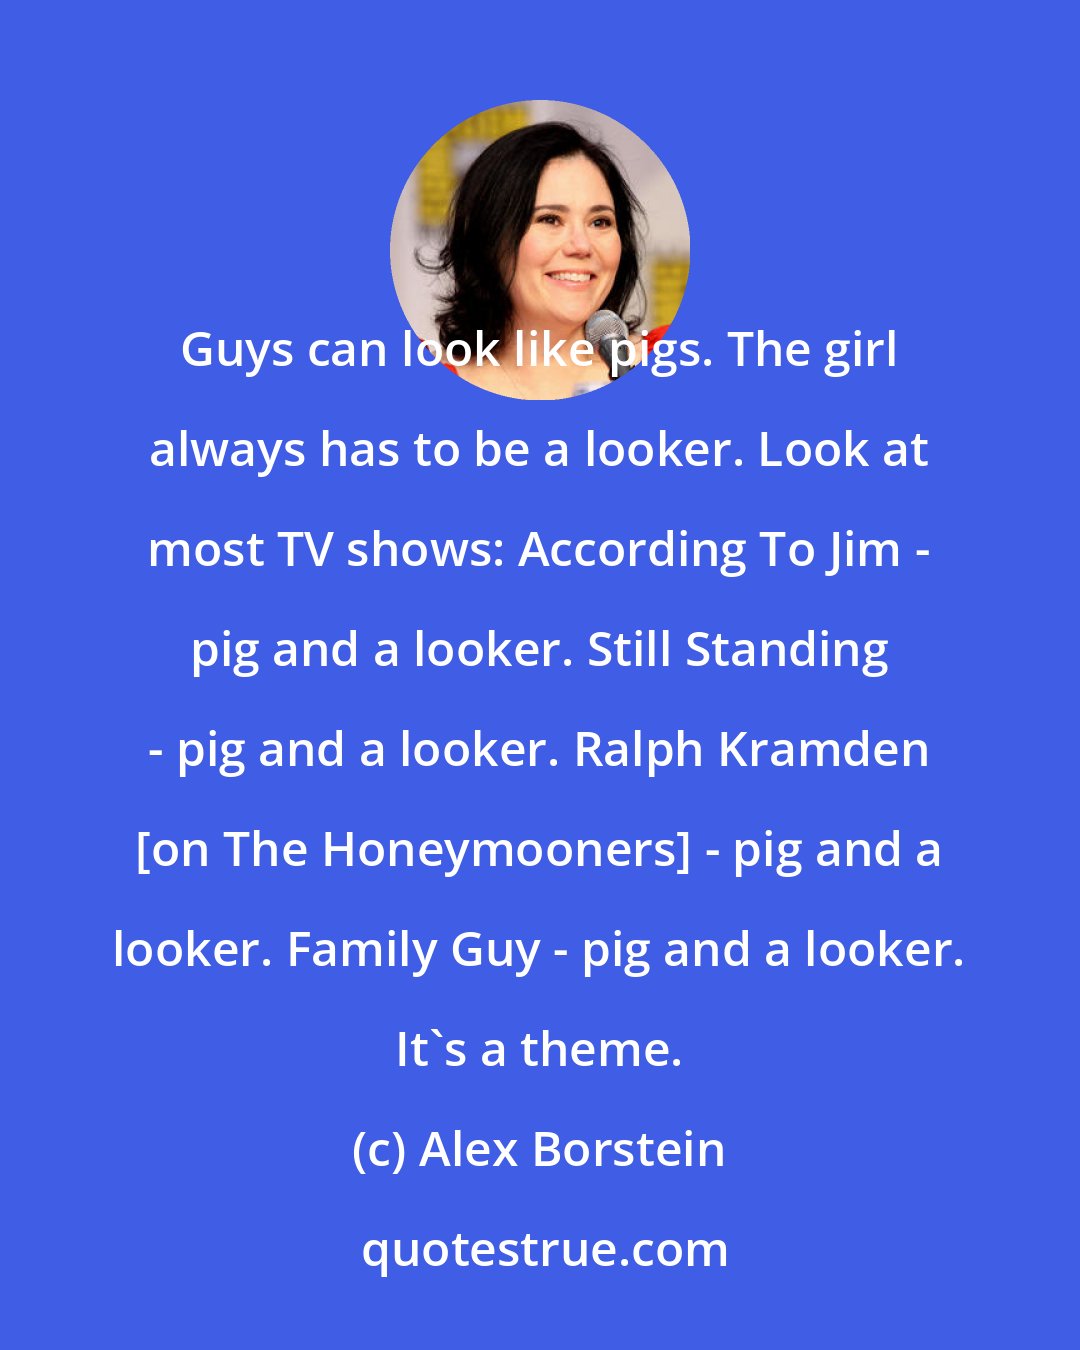 Alex Borstein: Guys can look like pigs. The girl always has to be a looker. Look at most TV shows: According To Jim - pig and a looker. Still Standing - pig and a looker. Ralph Kramden [on The Honeymooners] - pig and a looker. Family Guy - pig and a looker. It's a theme.